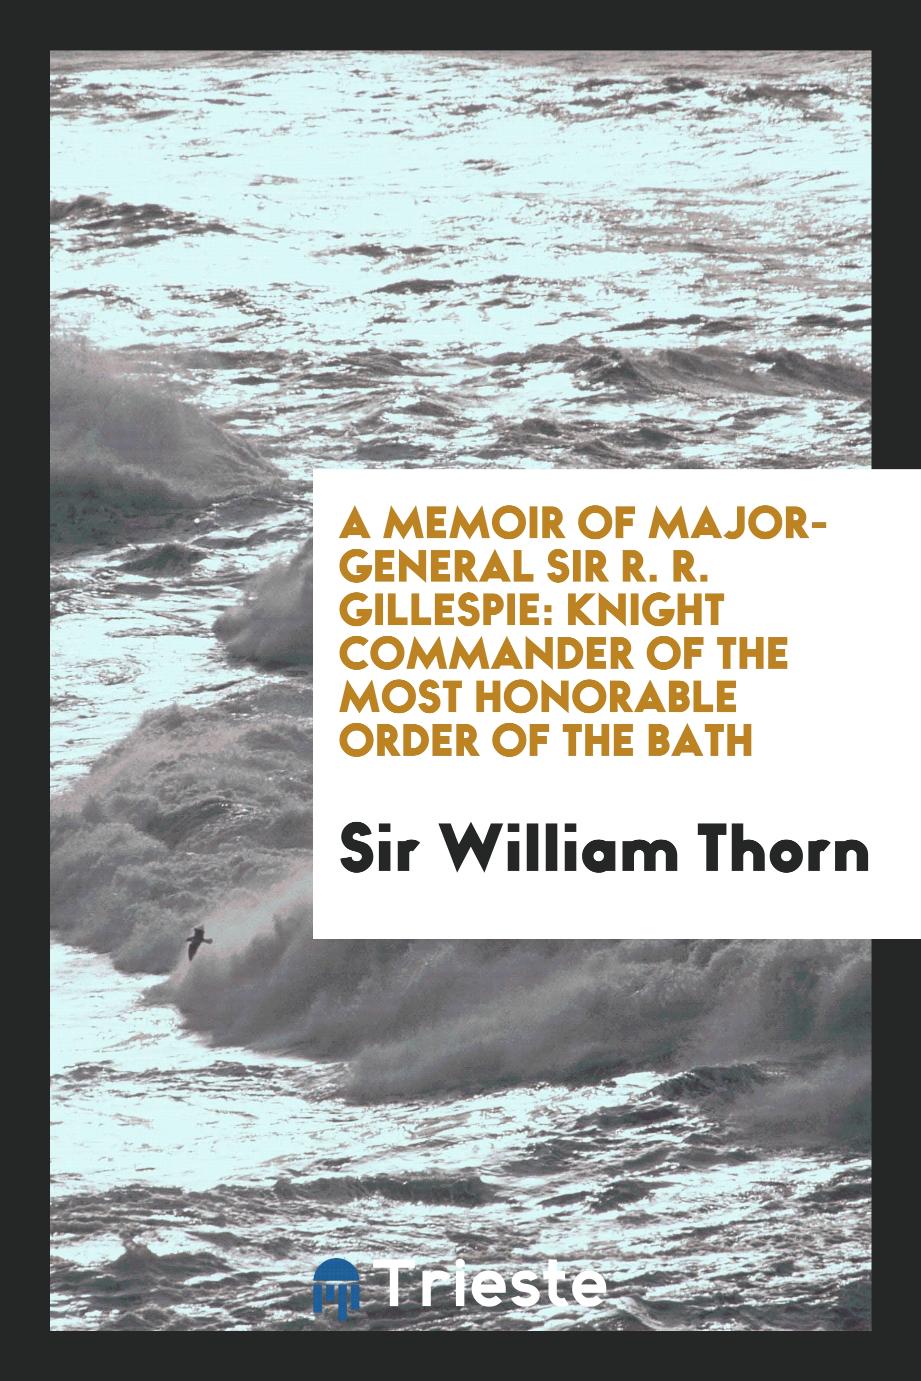 A Memoir of Major-General Sir R. R. Gillespie: Knight Commander of the Most Honorable Order of the Bath